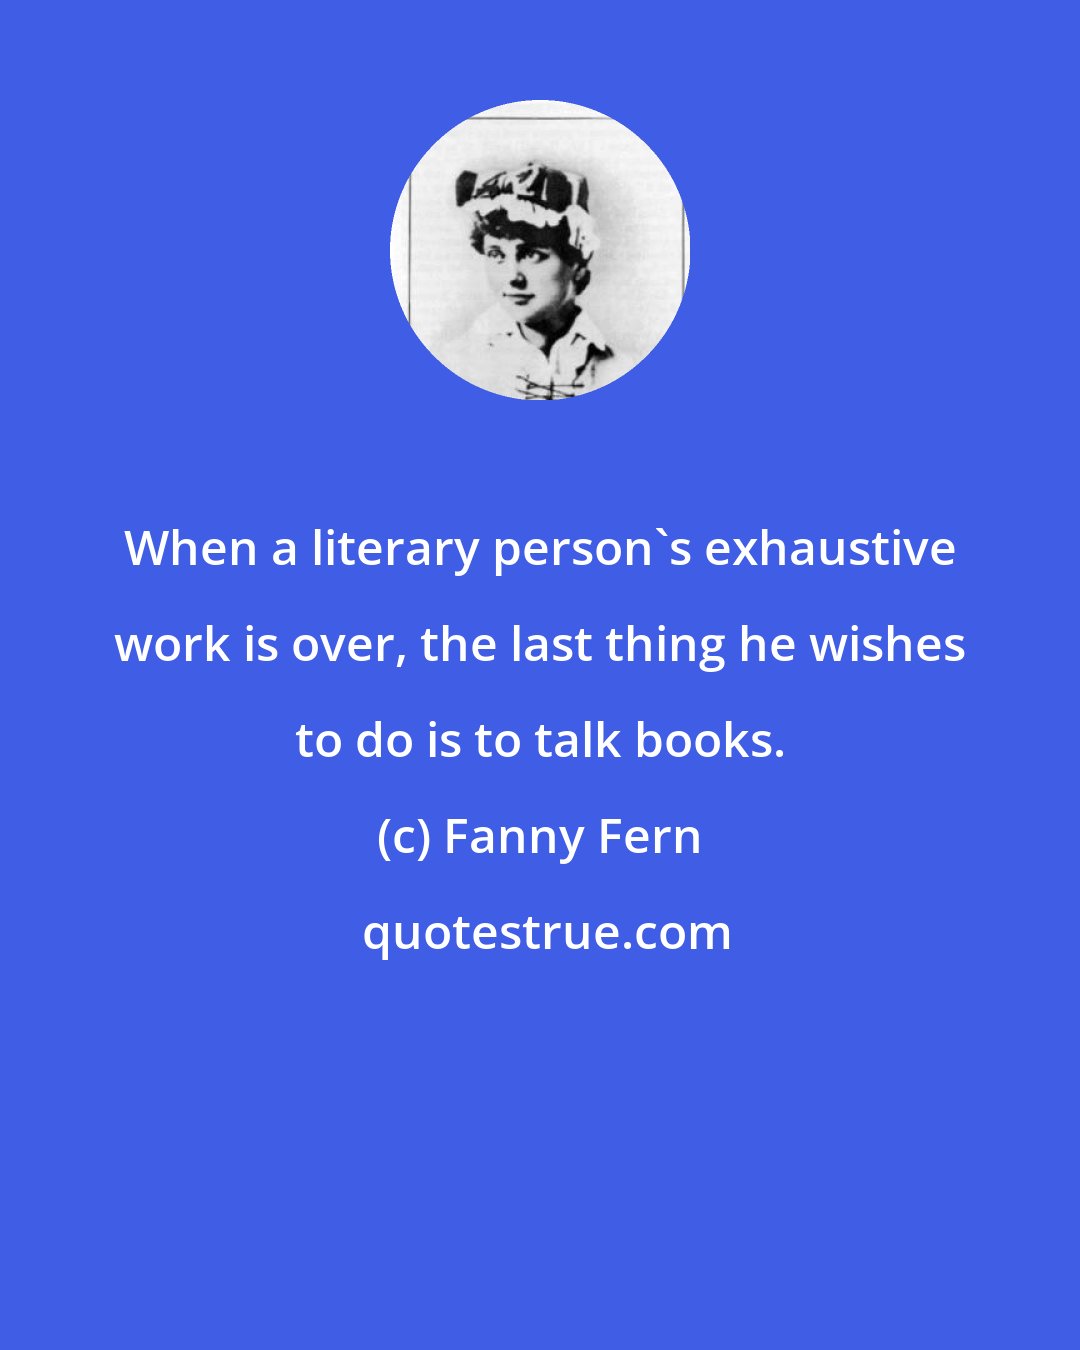 Fanny Fern: When a literary person's exhaustive work is over, the last thing he wishes to do is to talk books.